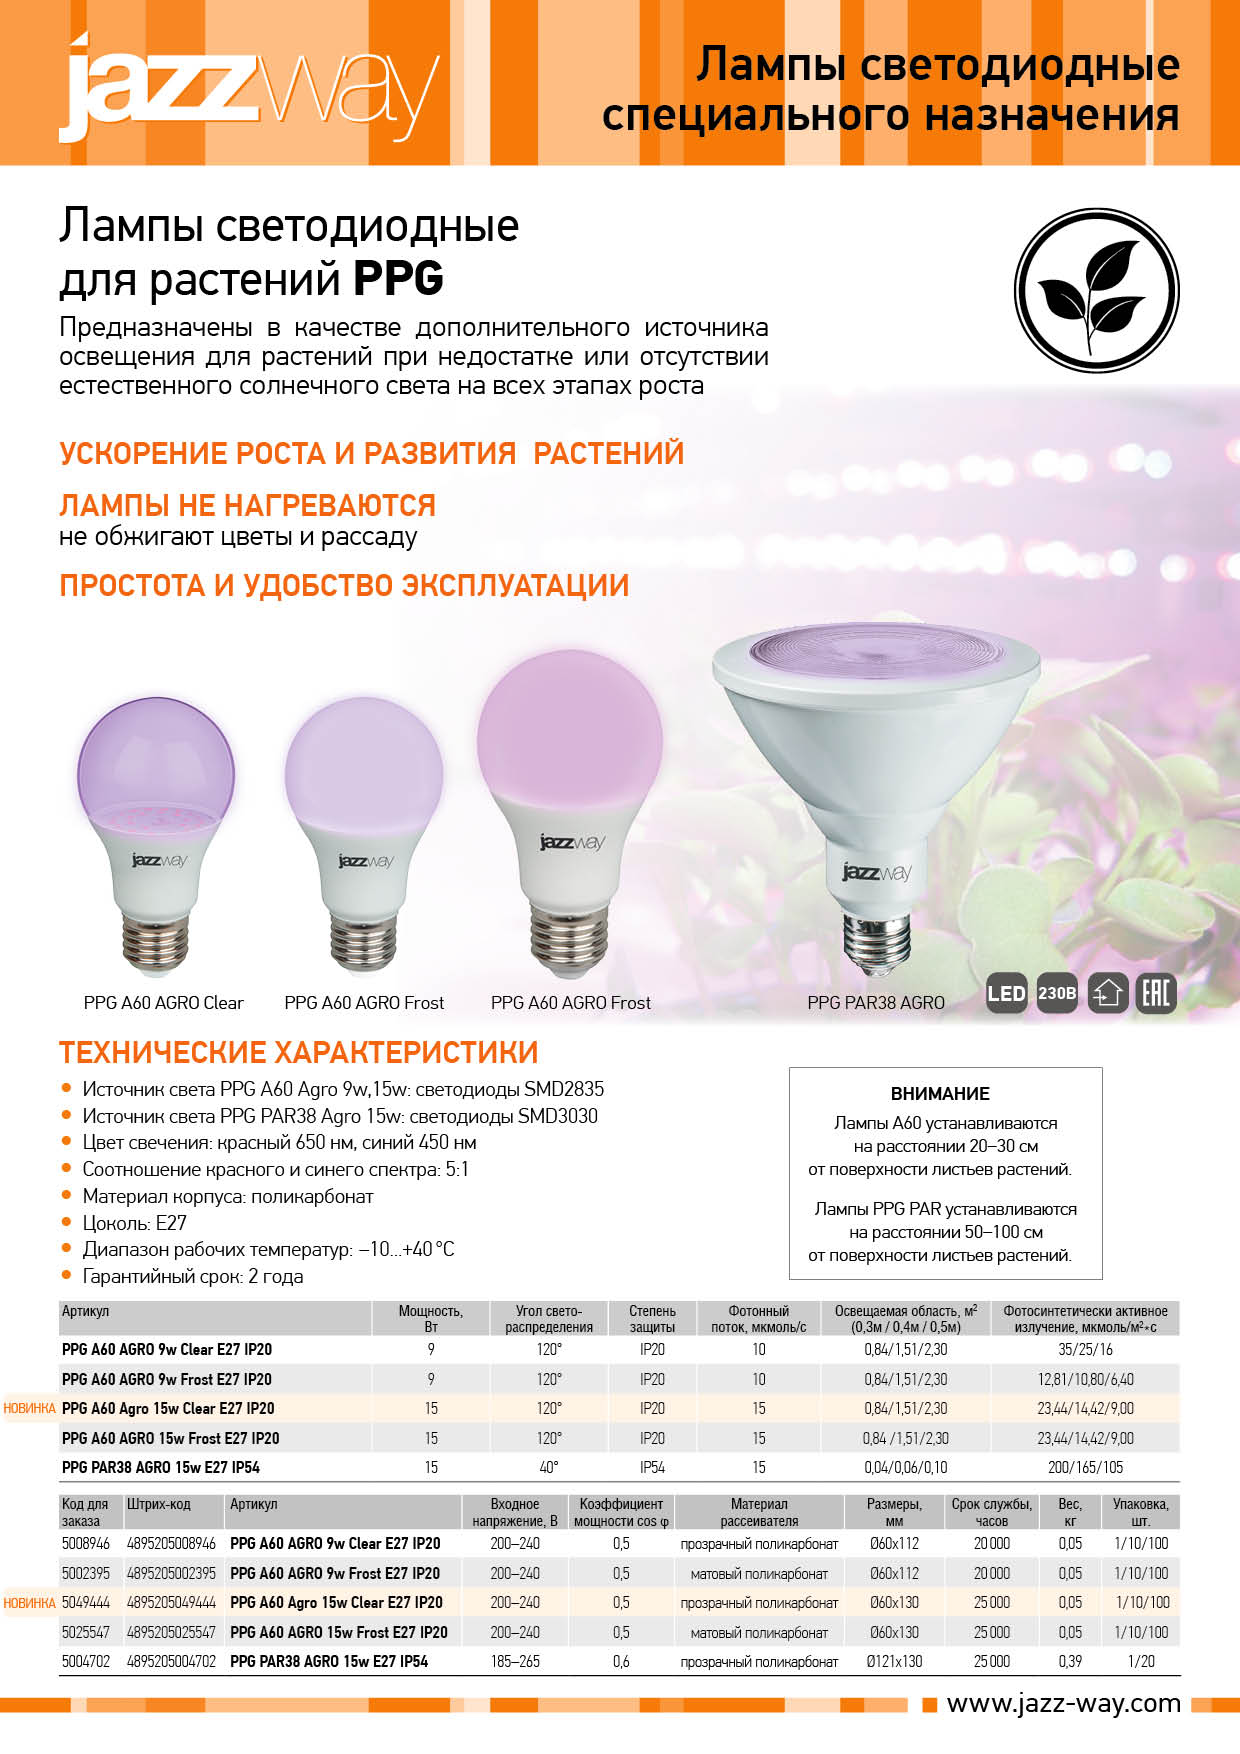  PPG A60 Agro 15w Clear E27 IP20